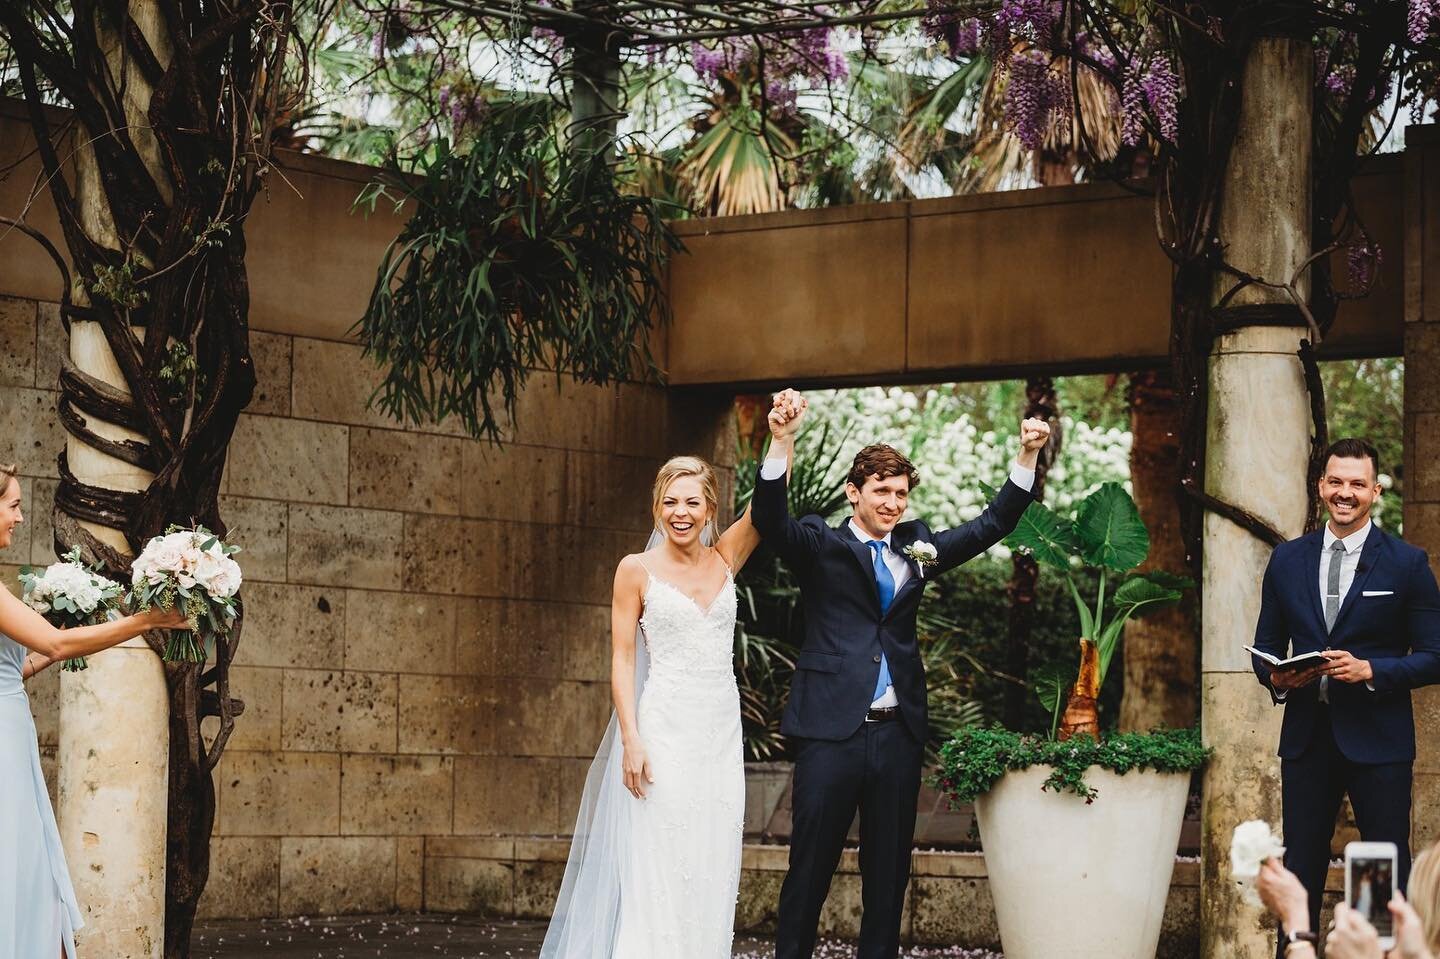 This is what &ldquo;we just got married&rdquo; looks like! Haley + Nick didn&rsquo;t waste any time celebrating the first day of the rest of their lives together!

officiant: Mathew DeBlanc
venue: @thedallasarboretum 
planning: @thesocialgather 
phot